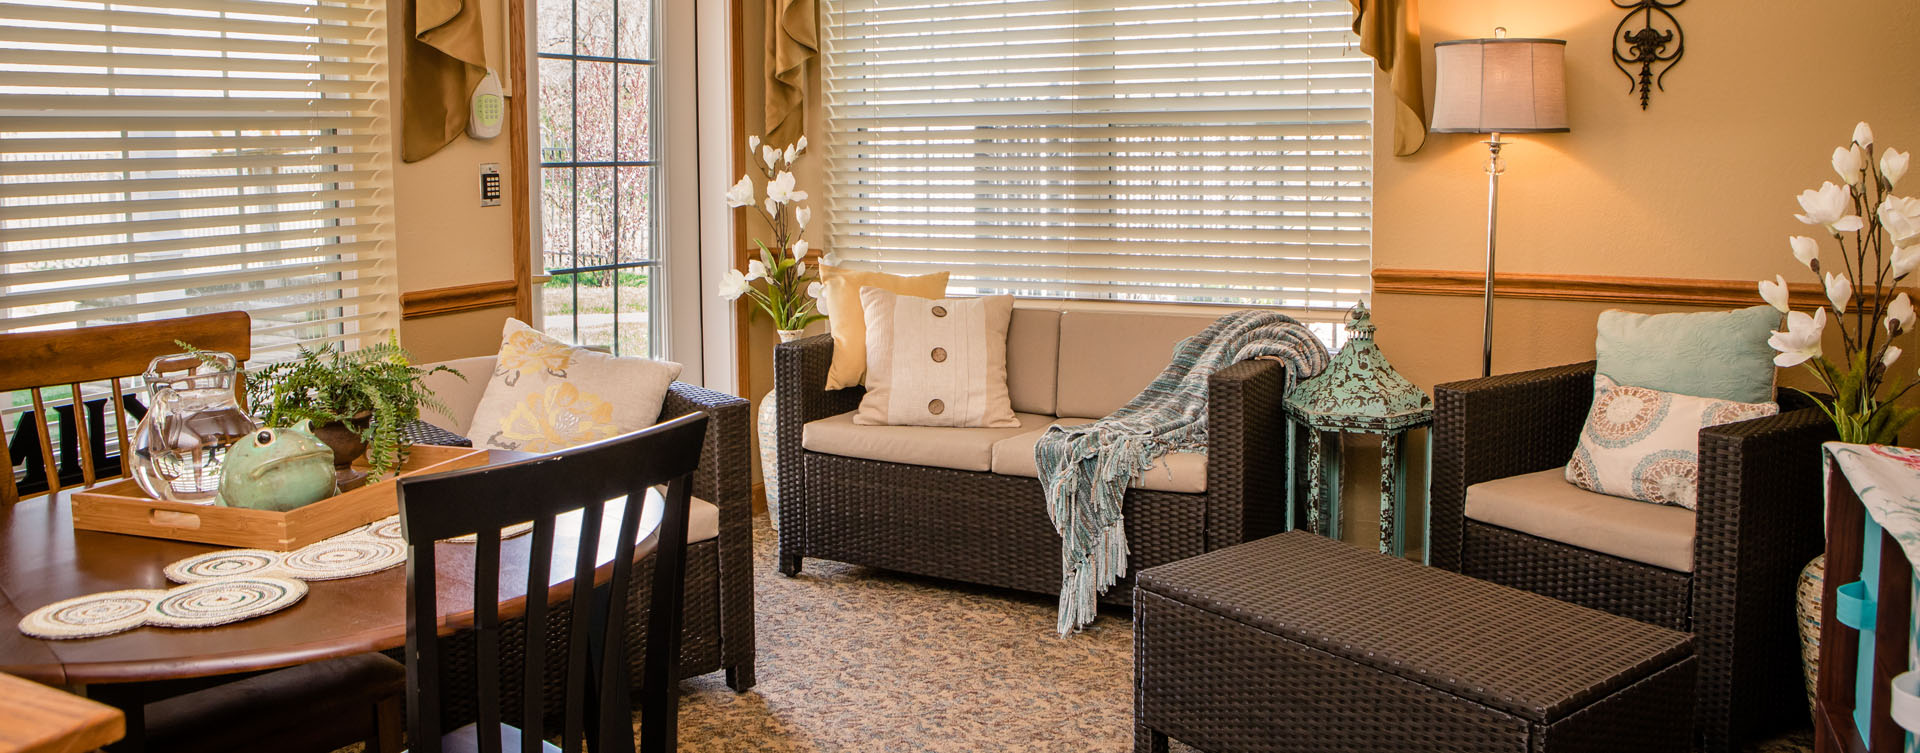 Enjoy the view of the outdoors from the sunroom at Bickford of Macomb